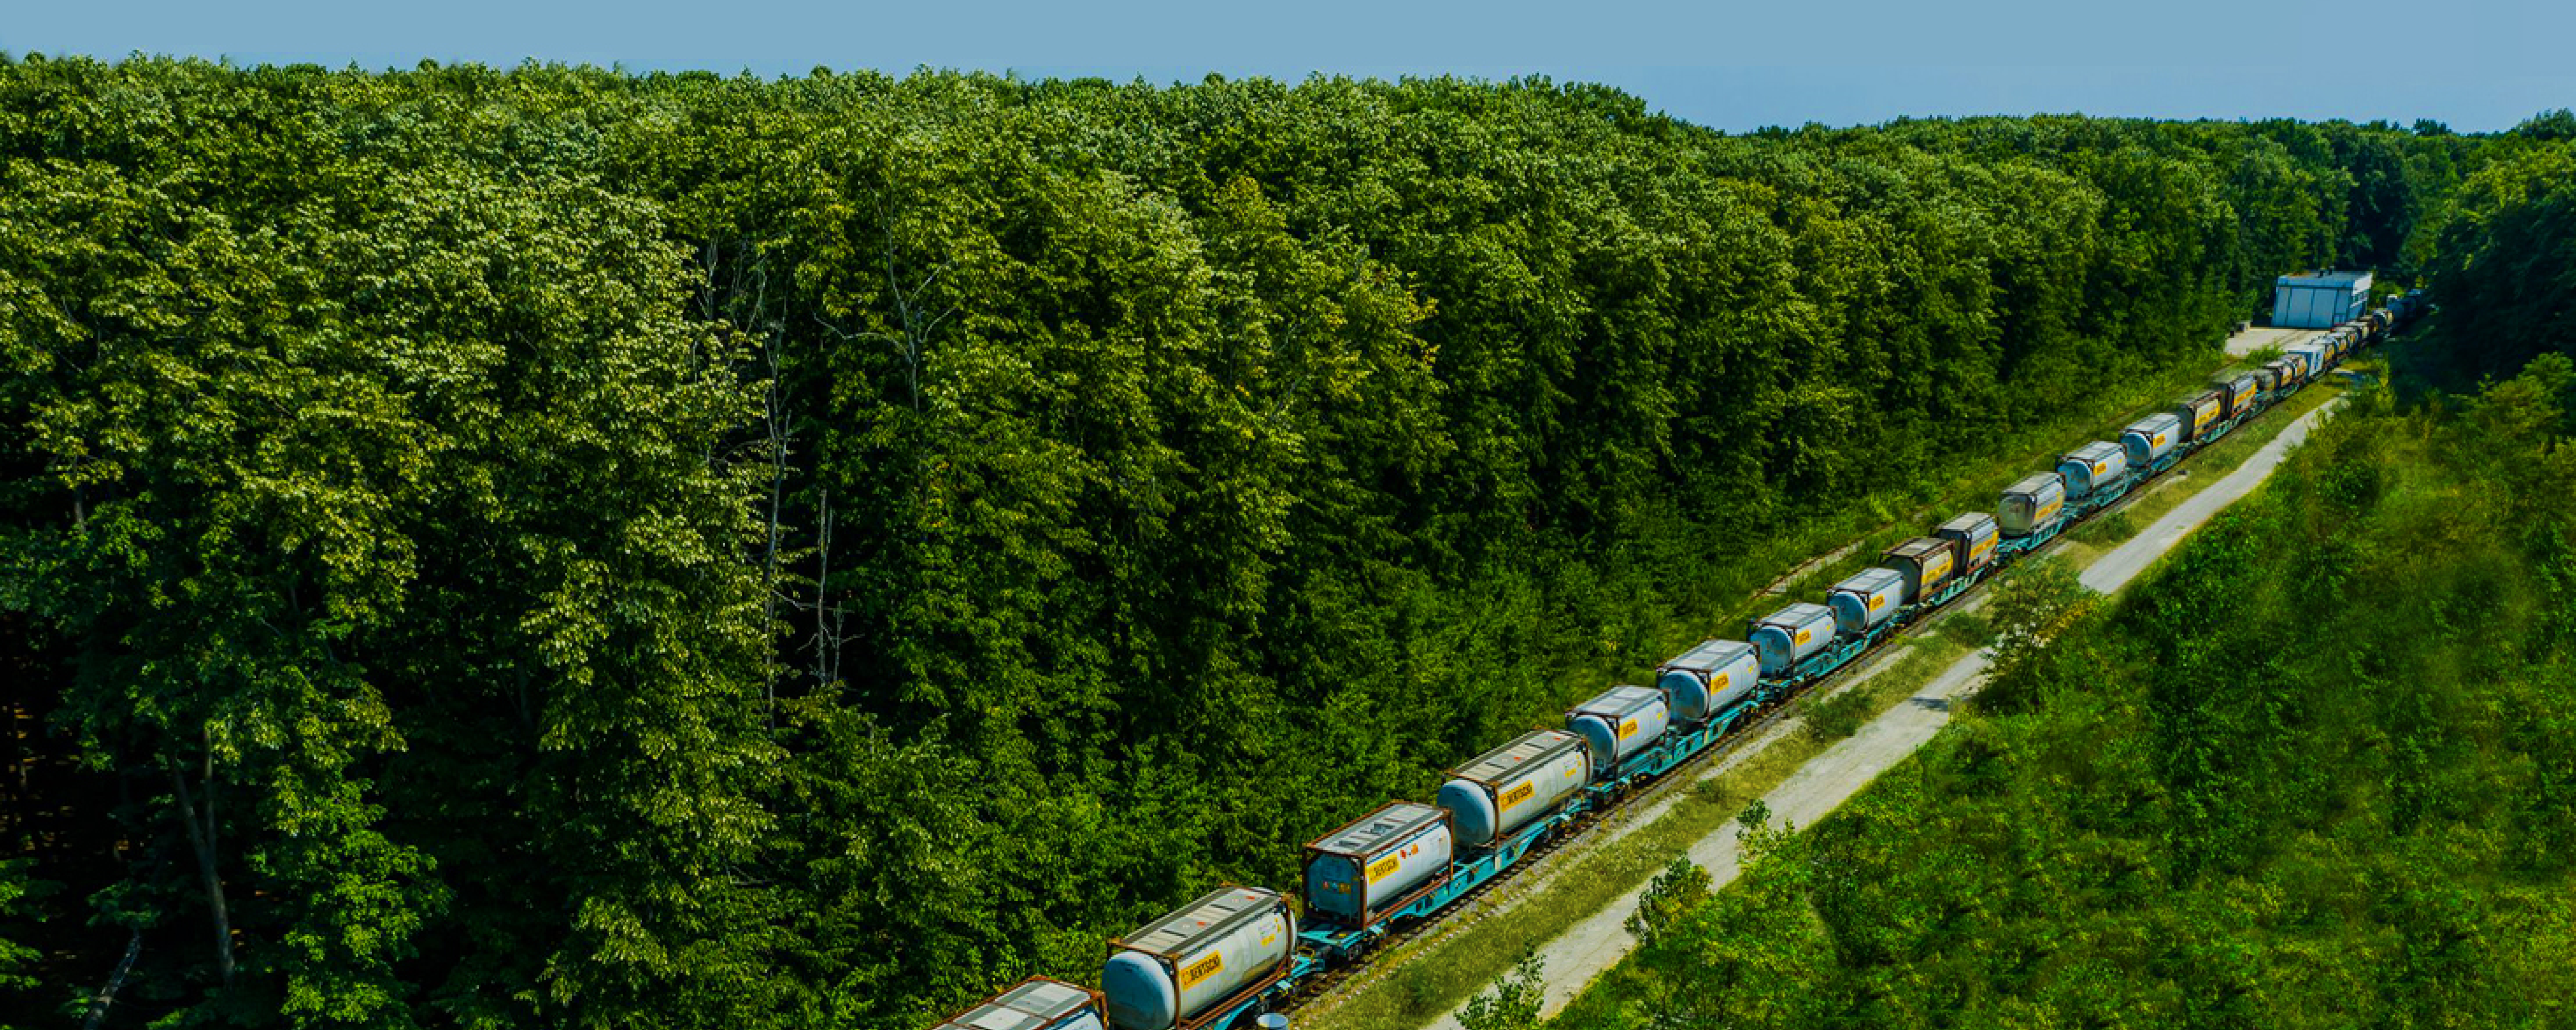 Cargo train filled with Bertschi containers passing through a green forest area